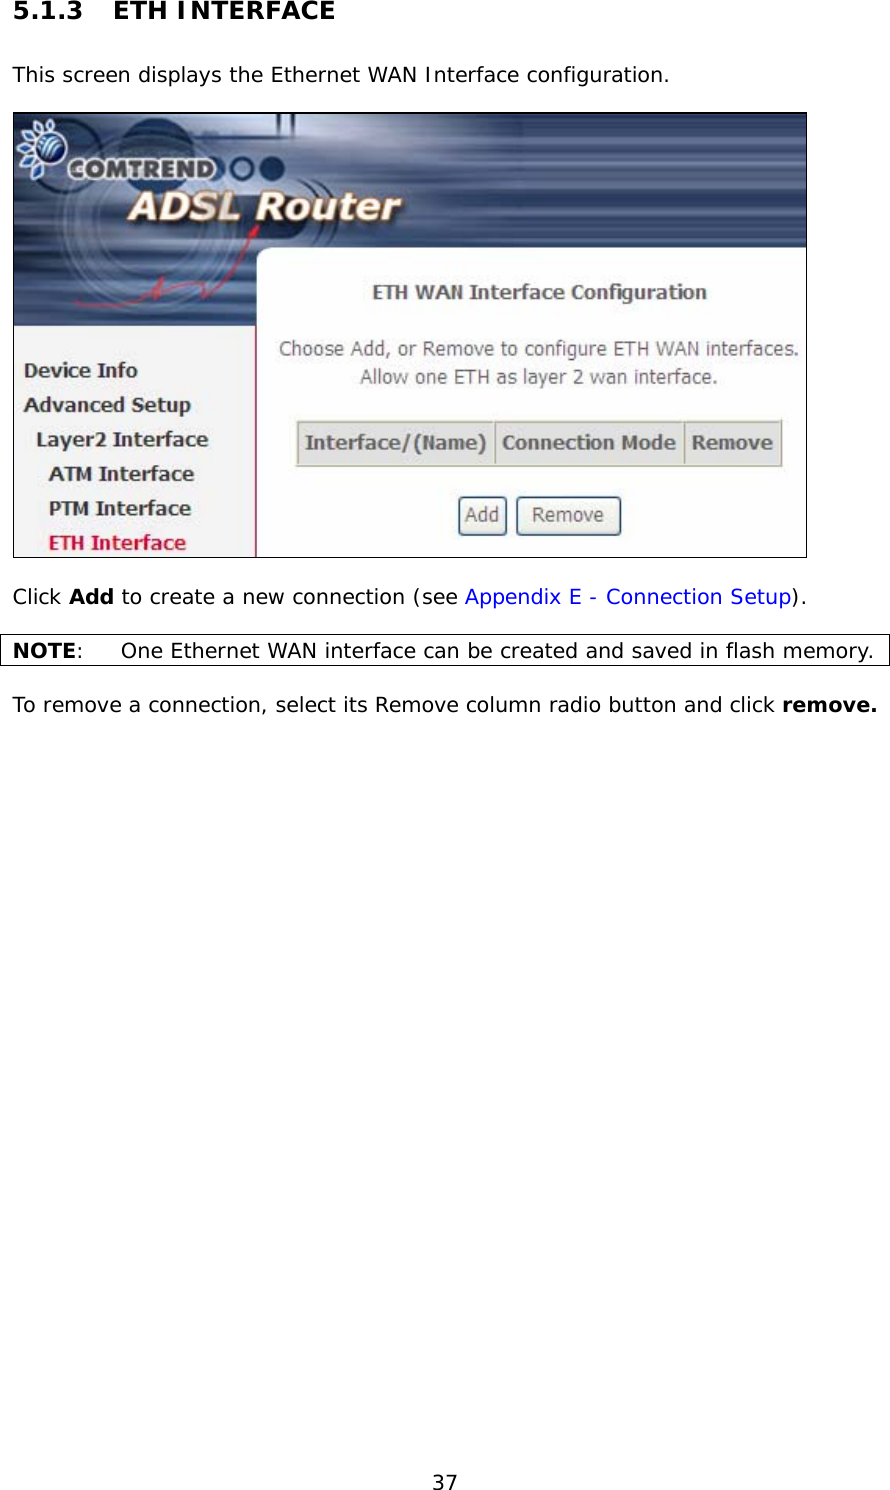  37 5.1.3 ETH INTERFACE This screen displays the Ethernet WAN Interface configuration.     Click Add to create a new connection (see Appendix E - Connection Setup).  NOTE:  One Ethernet WAN interface can be created and saved in flash memory.    To remove a connection, select its Remove column radio button and click remove. 